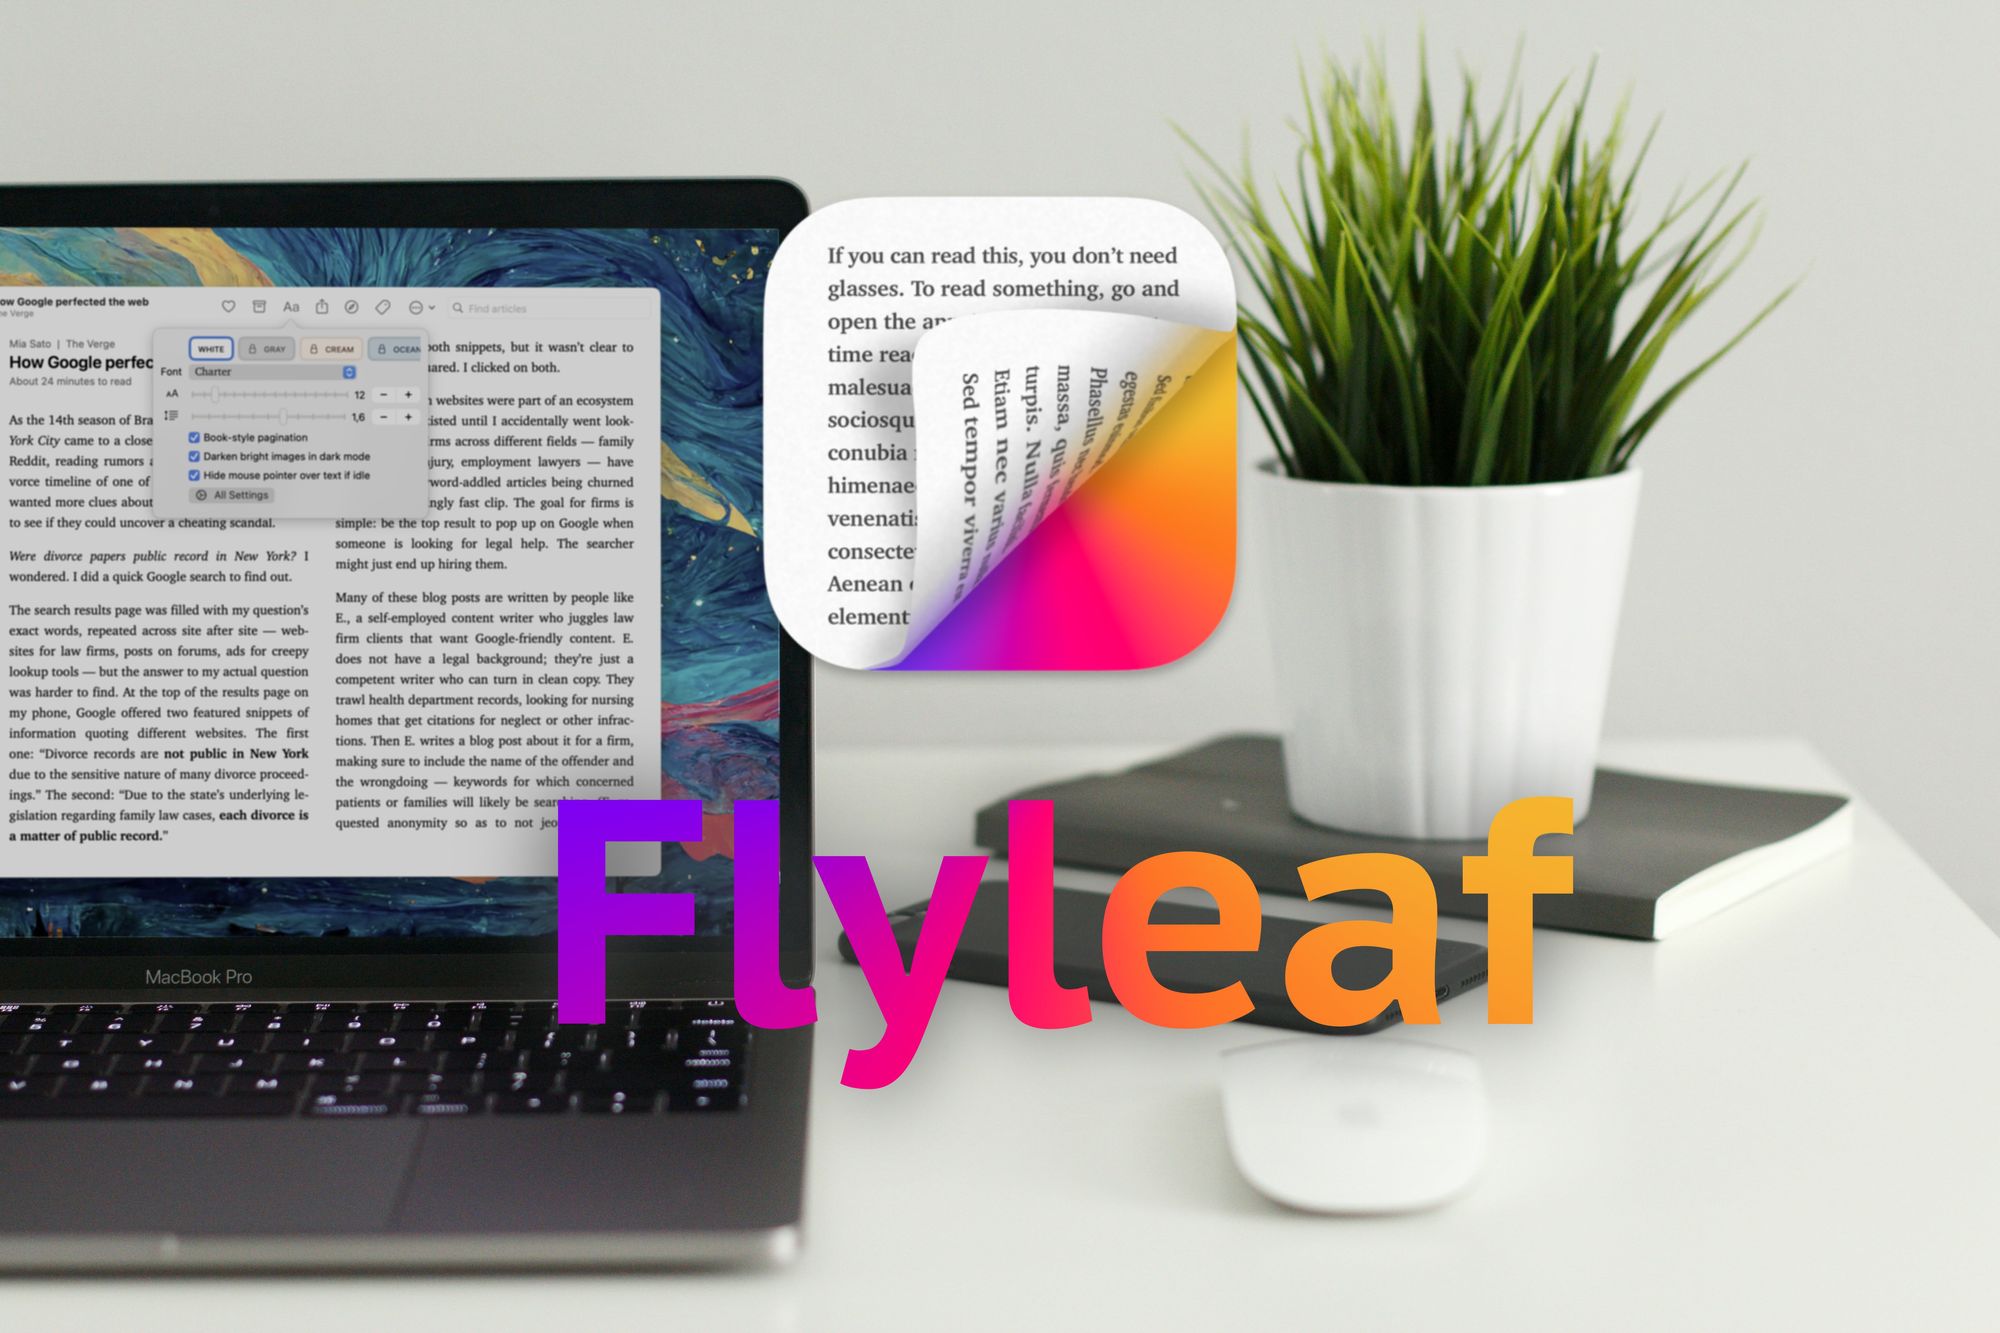 Read articles like books – with Flyleaf